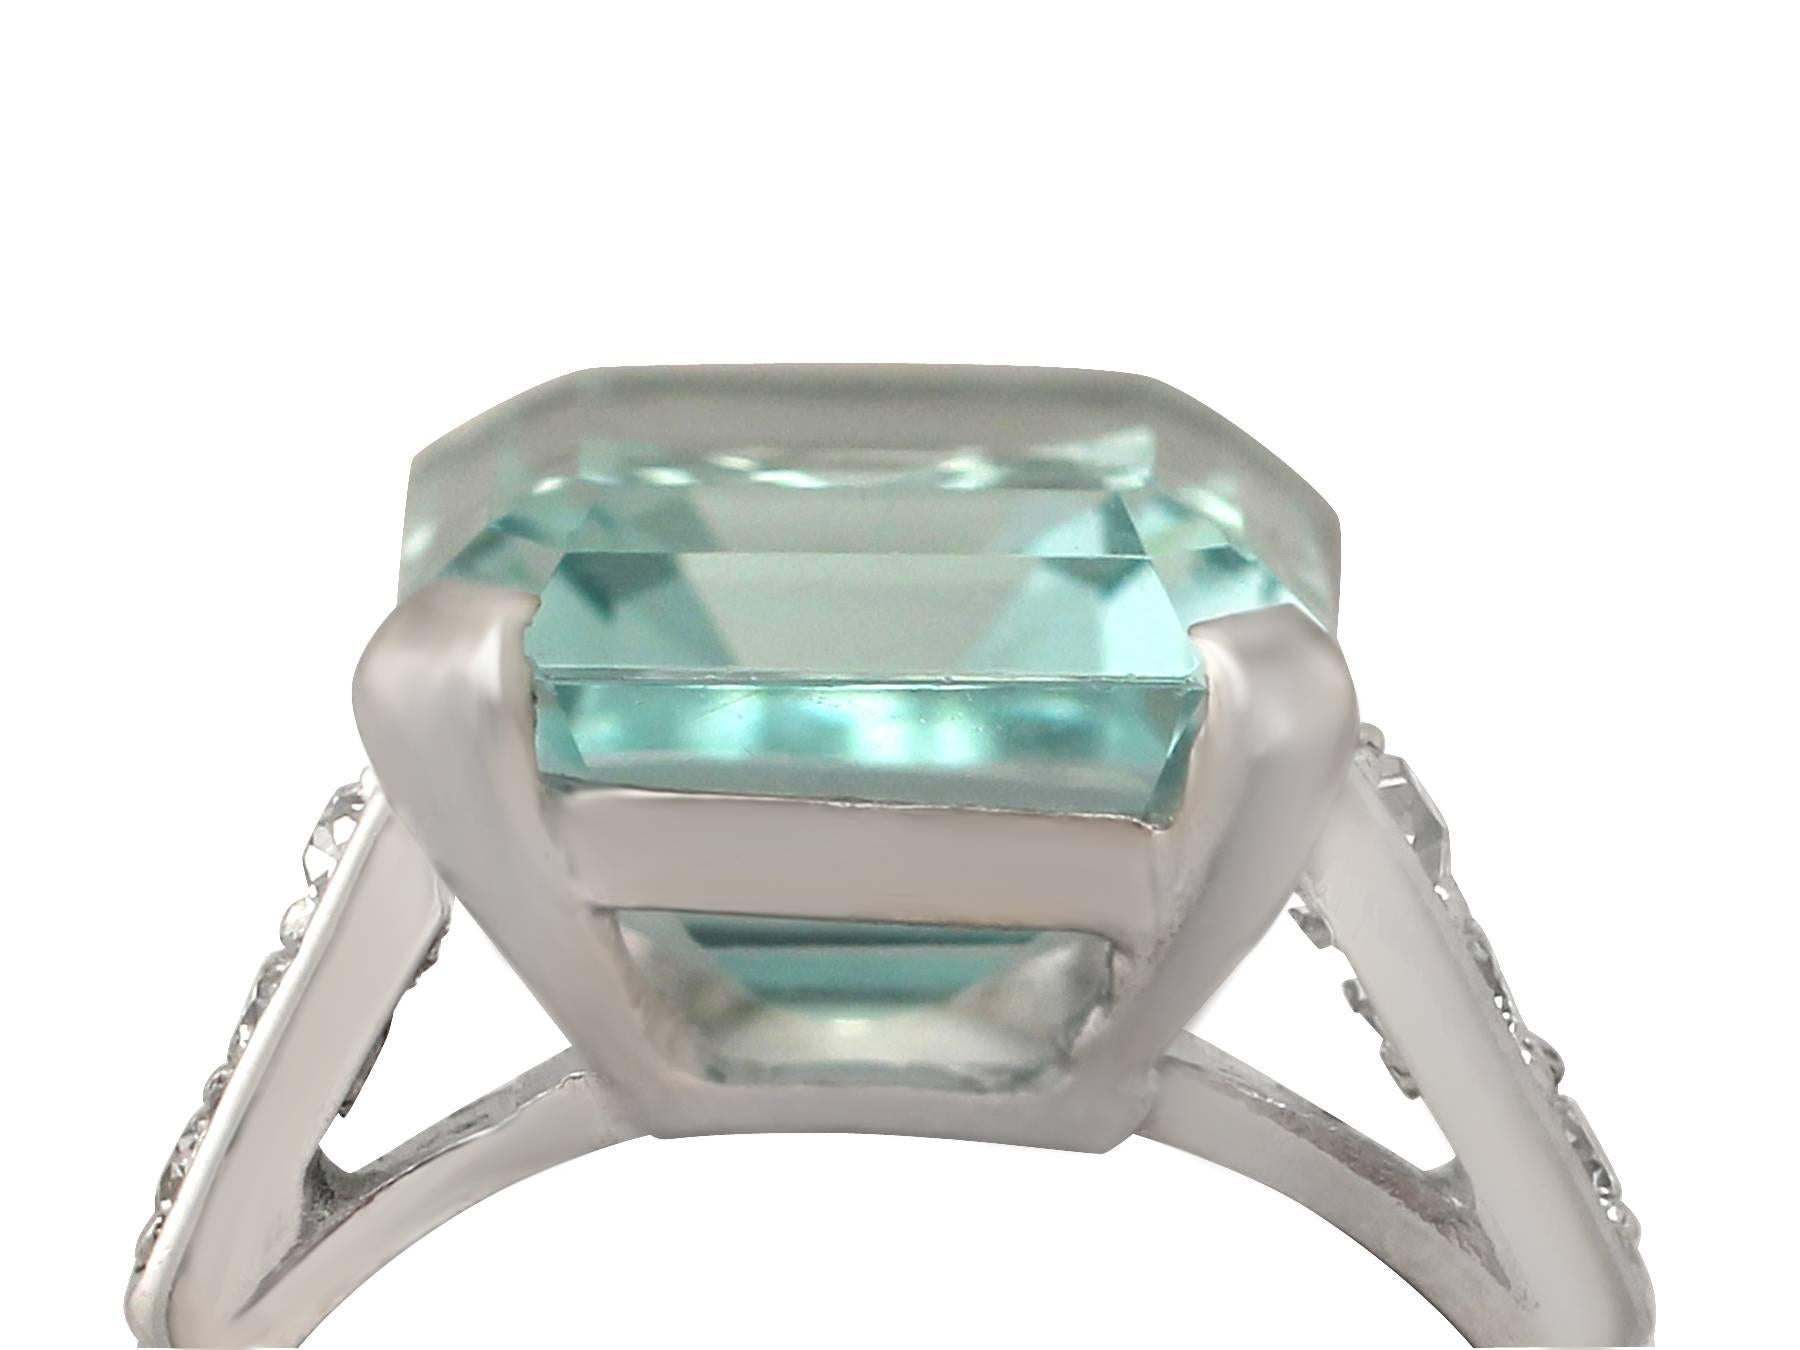 A fine and impressive 4.98 carat aquamarine and 0.12 carat diamond (total), 18 carat white gold dress ring; part of our diverse gemstone jewellery collection

Description

This fine and impressive aquamarine ring has been crafted in 18 ct white